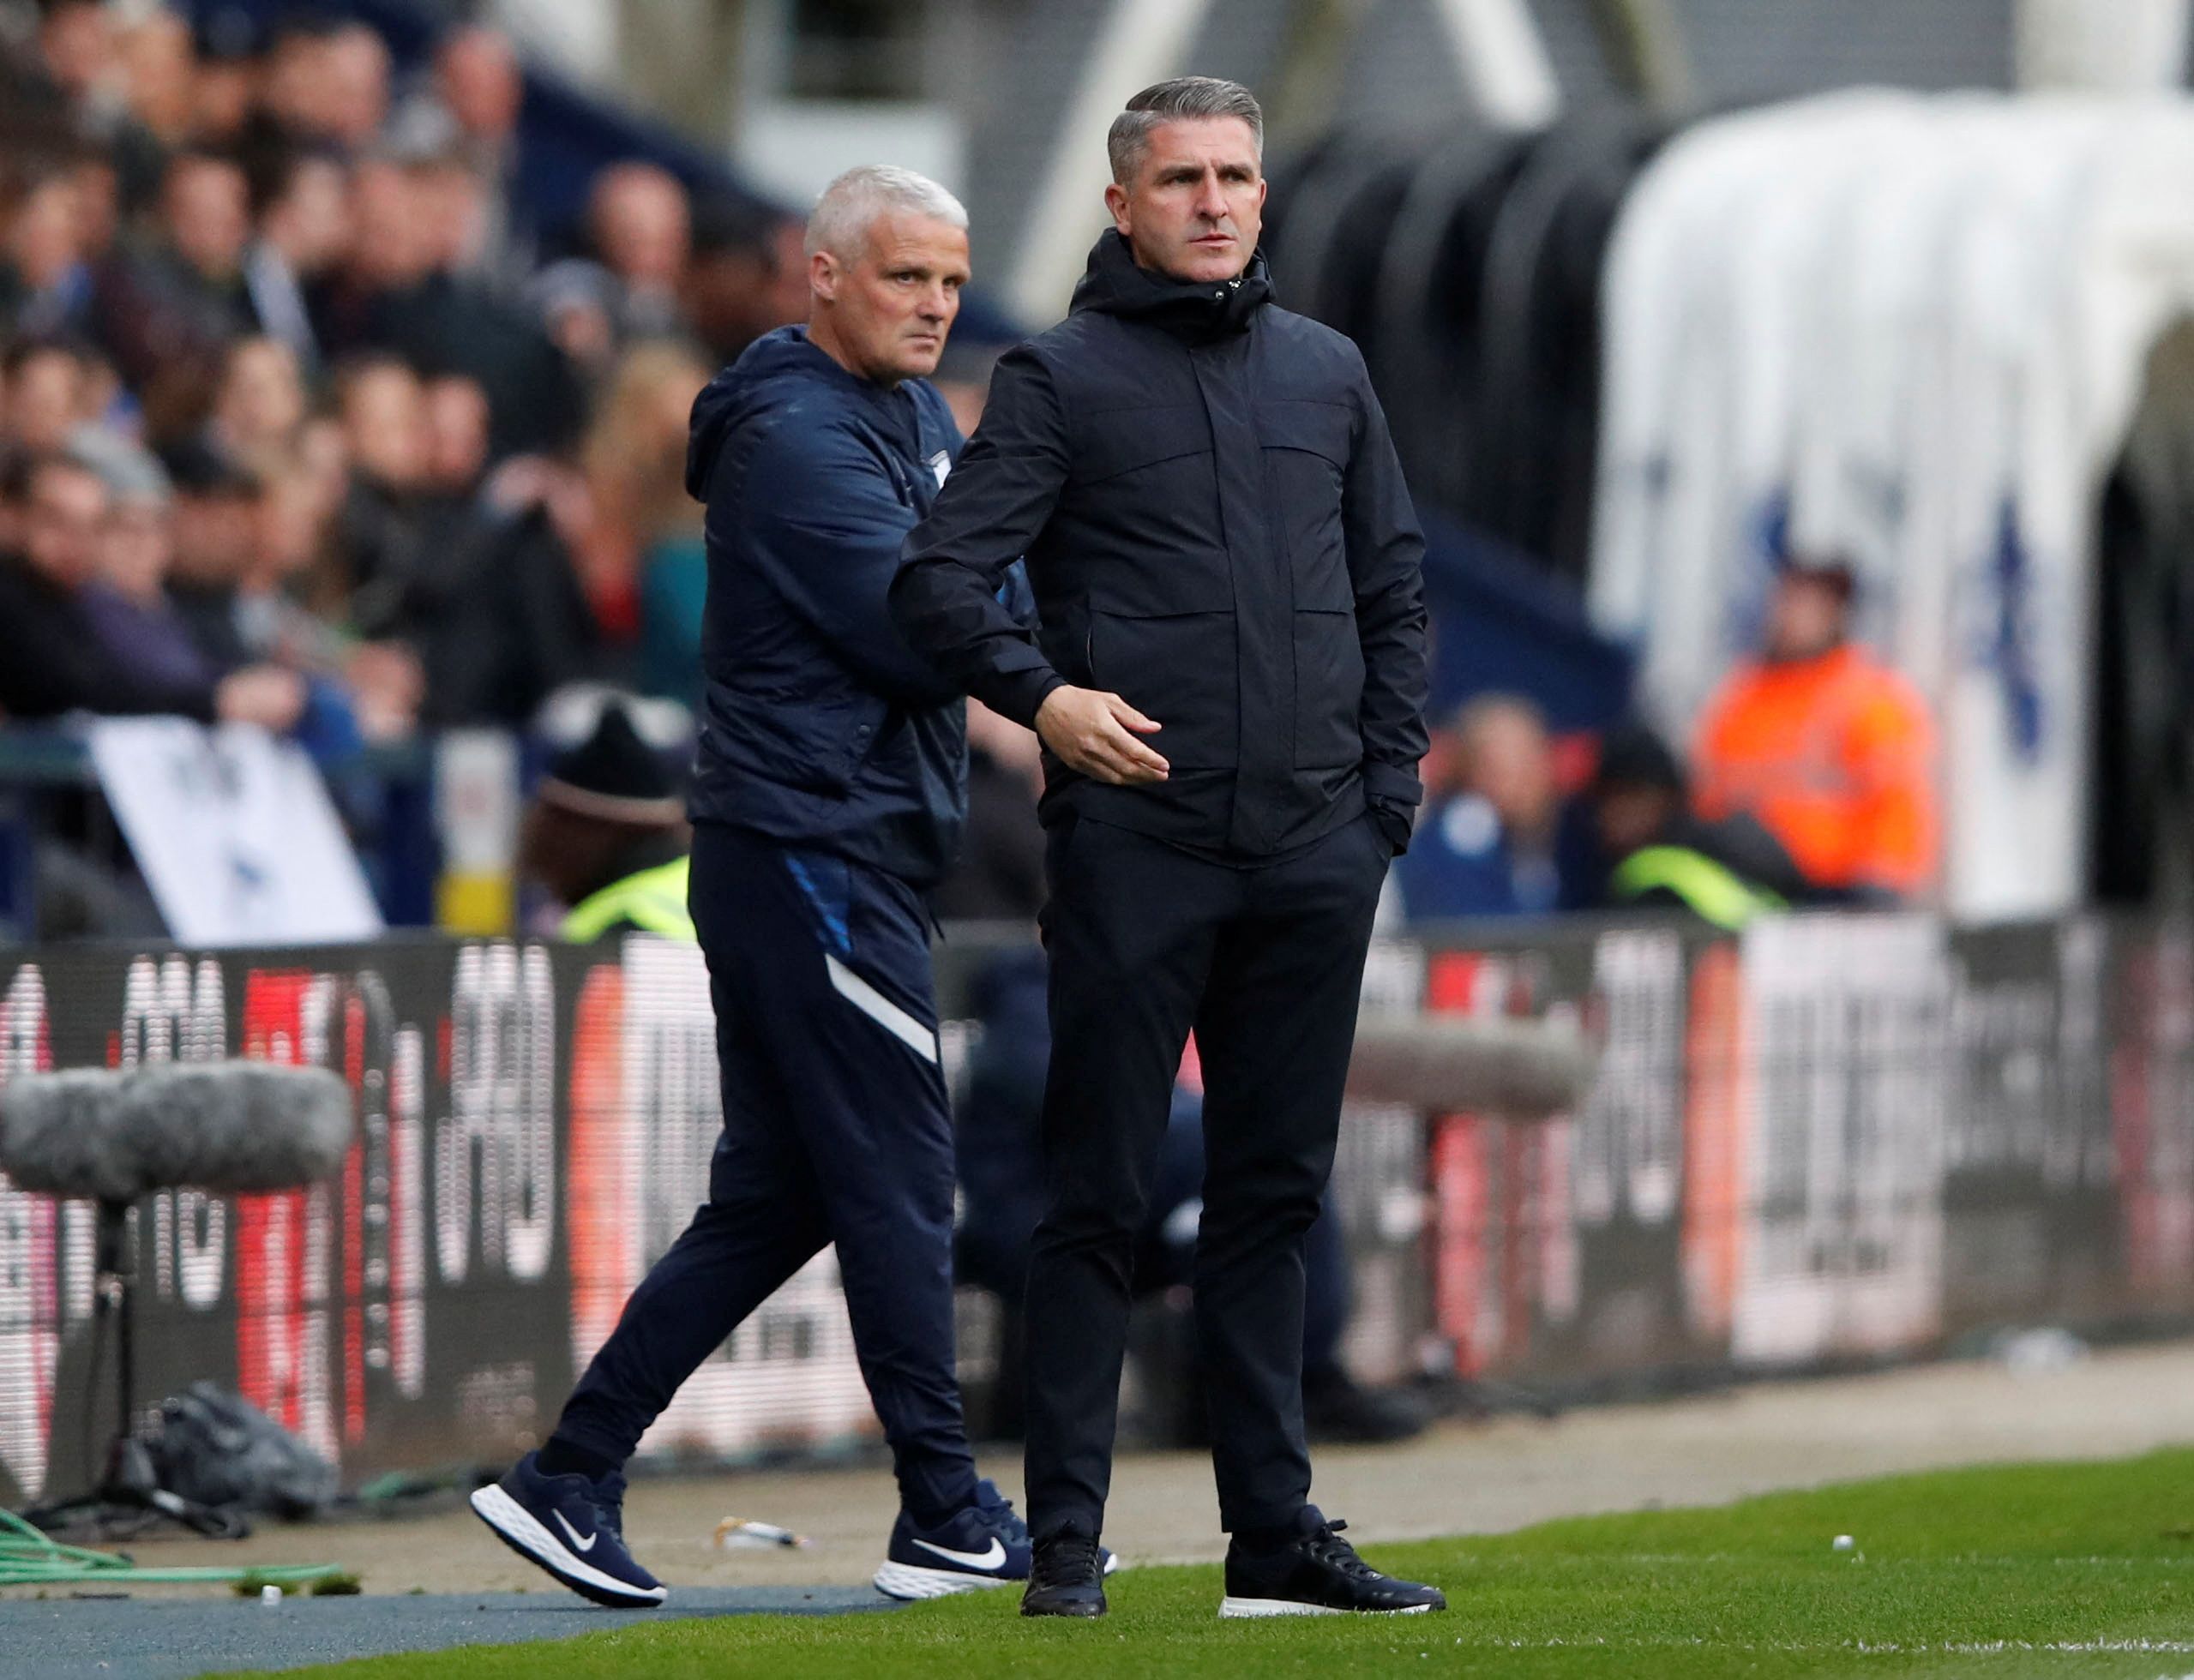 Soccer Football - Championship - Preston North End v Blackburn Rovers - Deepdale, Preston, Britain - April 25, 2022 Preston North End manager Ryan Lowe  Action Images/Molly Darlington  EDITORIAL USE ONLY. No use with unauthorized audio, video, data, fixture lists, club/league logos or 